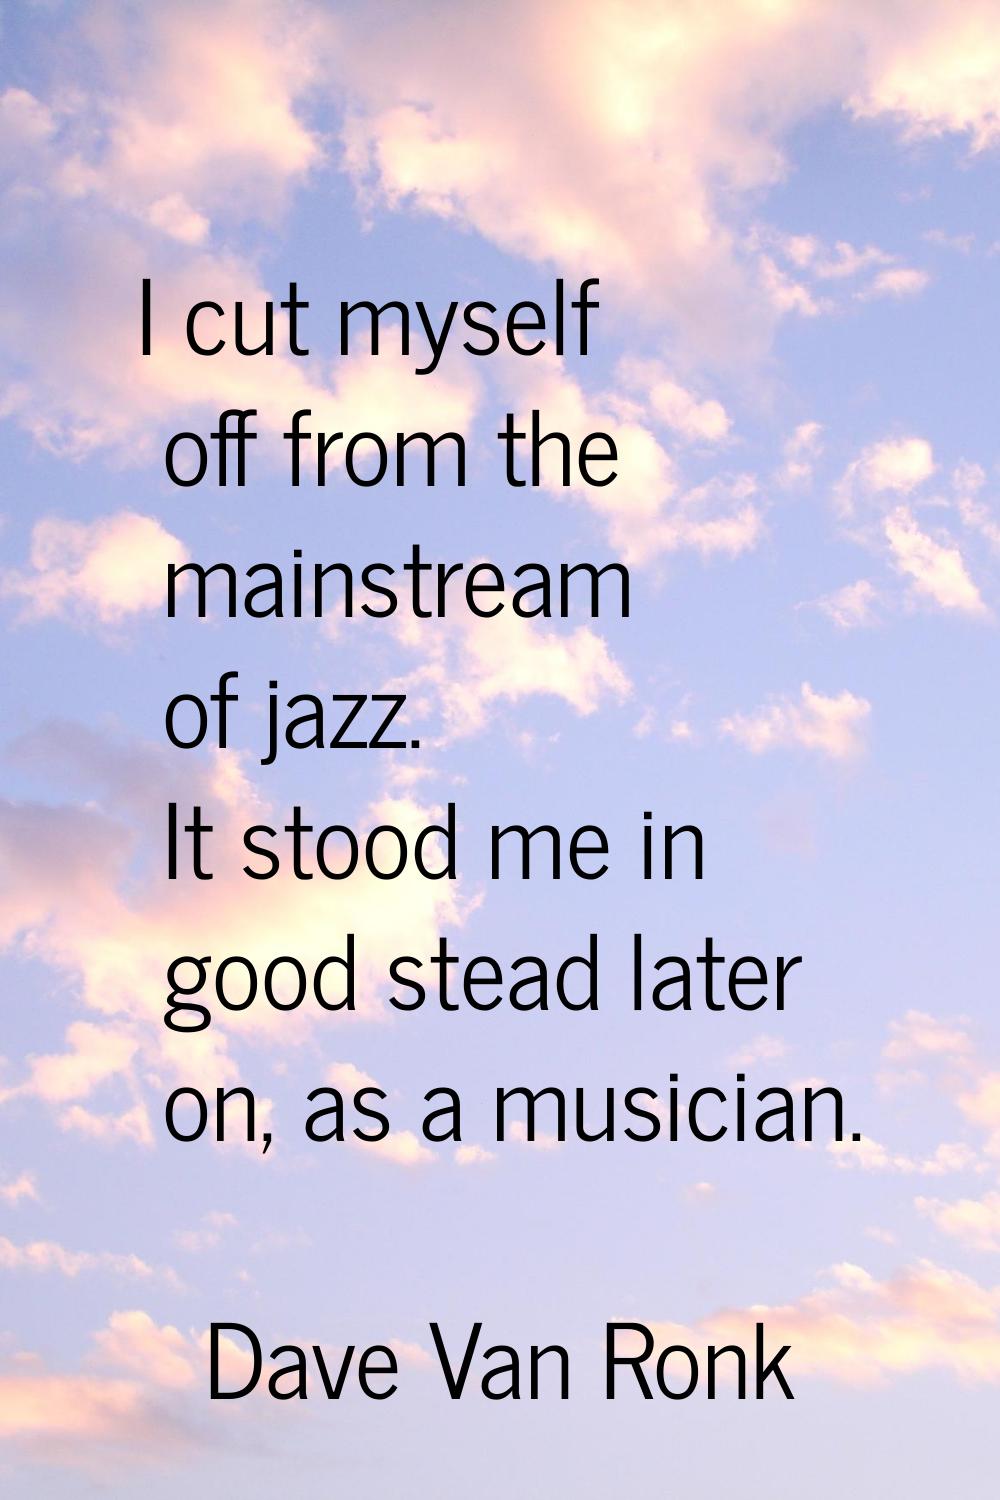 I cut myself off from the mainstream of jazz. It stood me in good stead later on, as a musician.